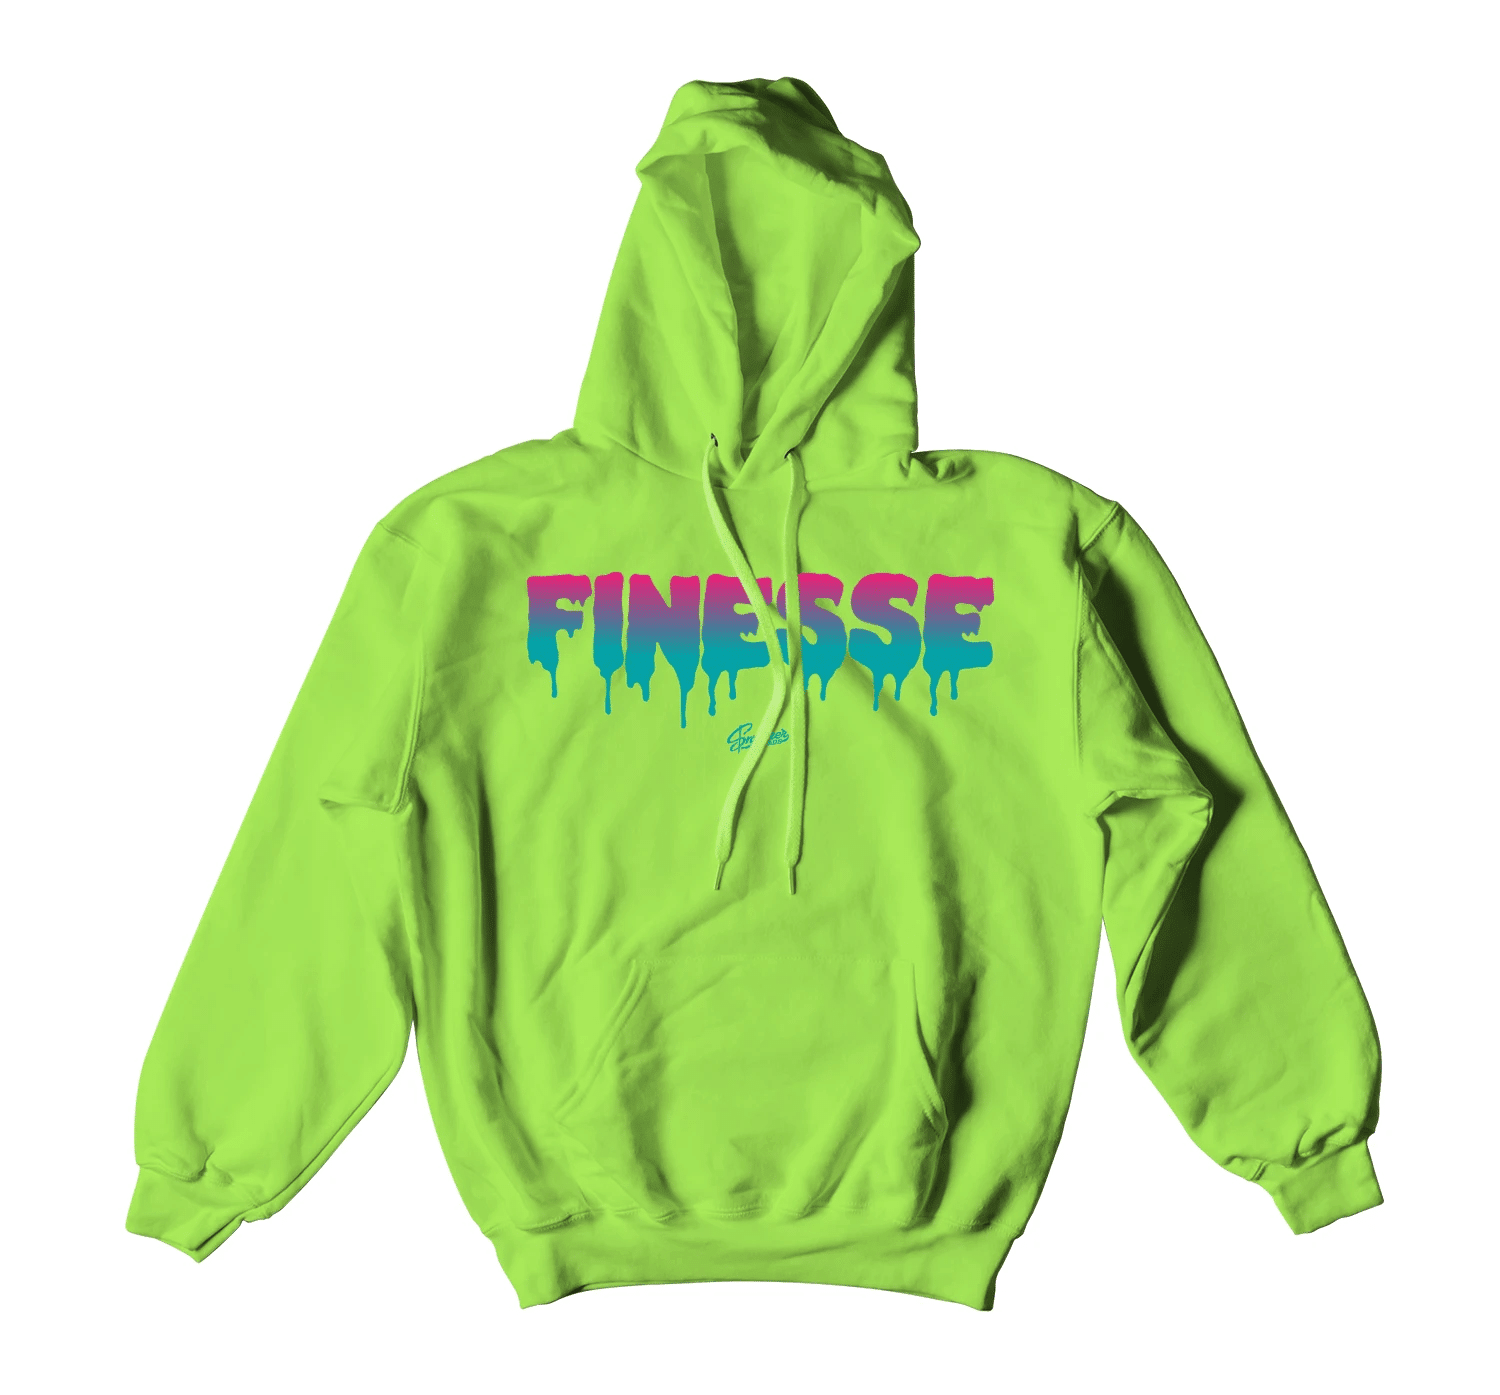 All Star 2020 Swackhammer Finesse Hoodie Outfit